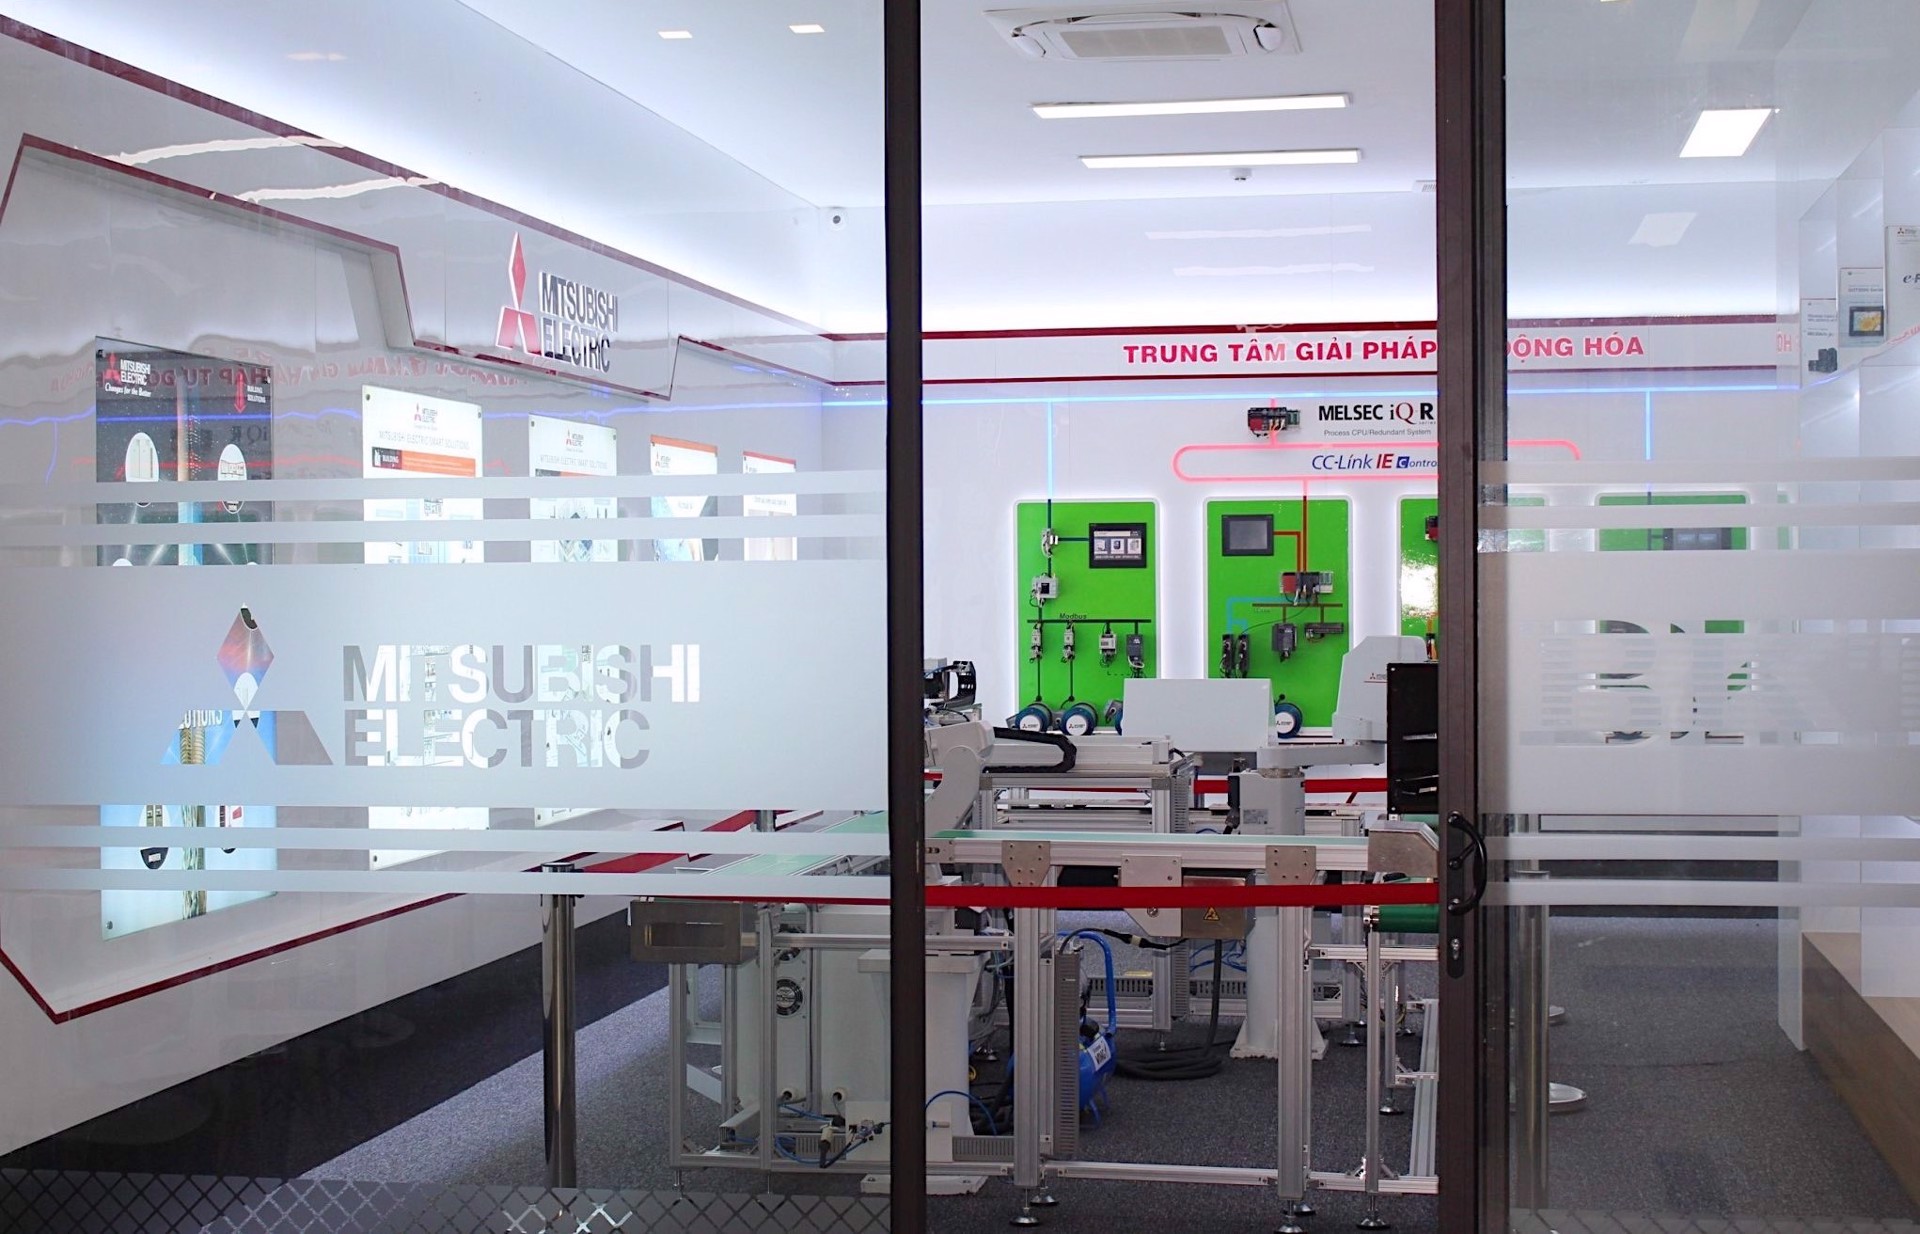 Mitsubishi Electric’s Factory Automation Solution Center in Hanoi